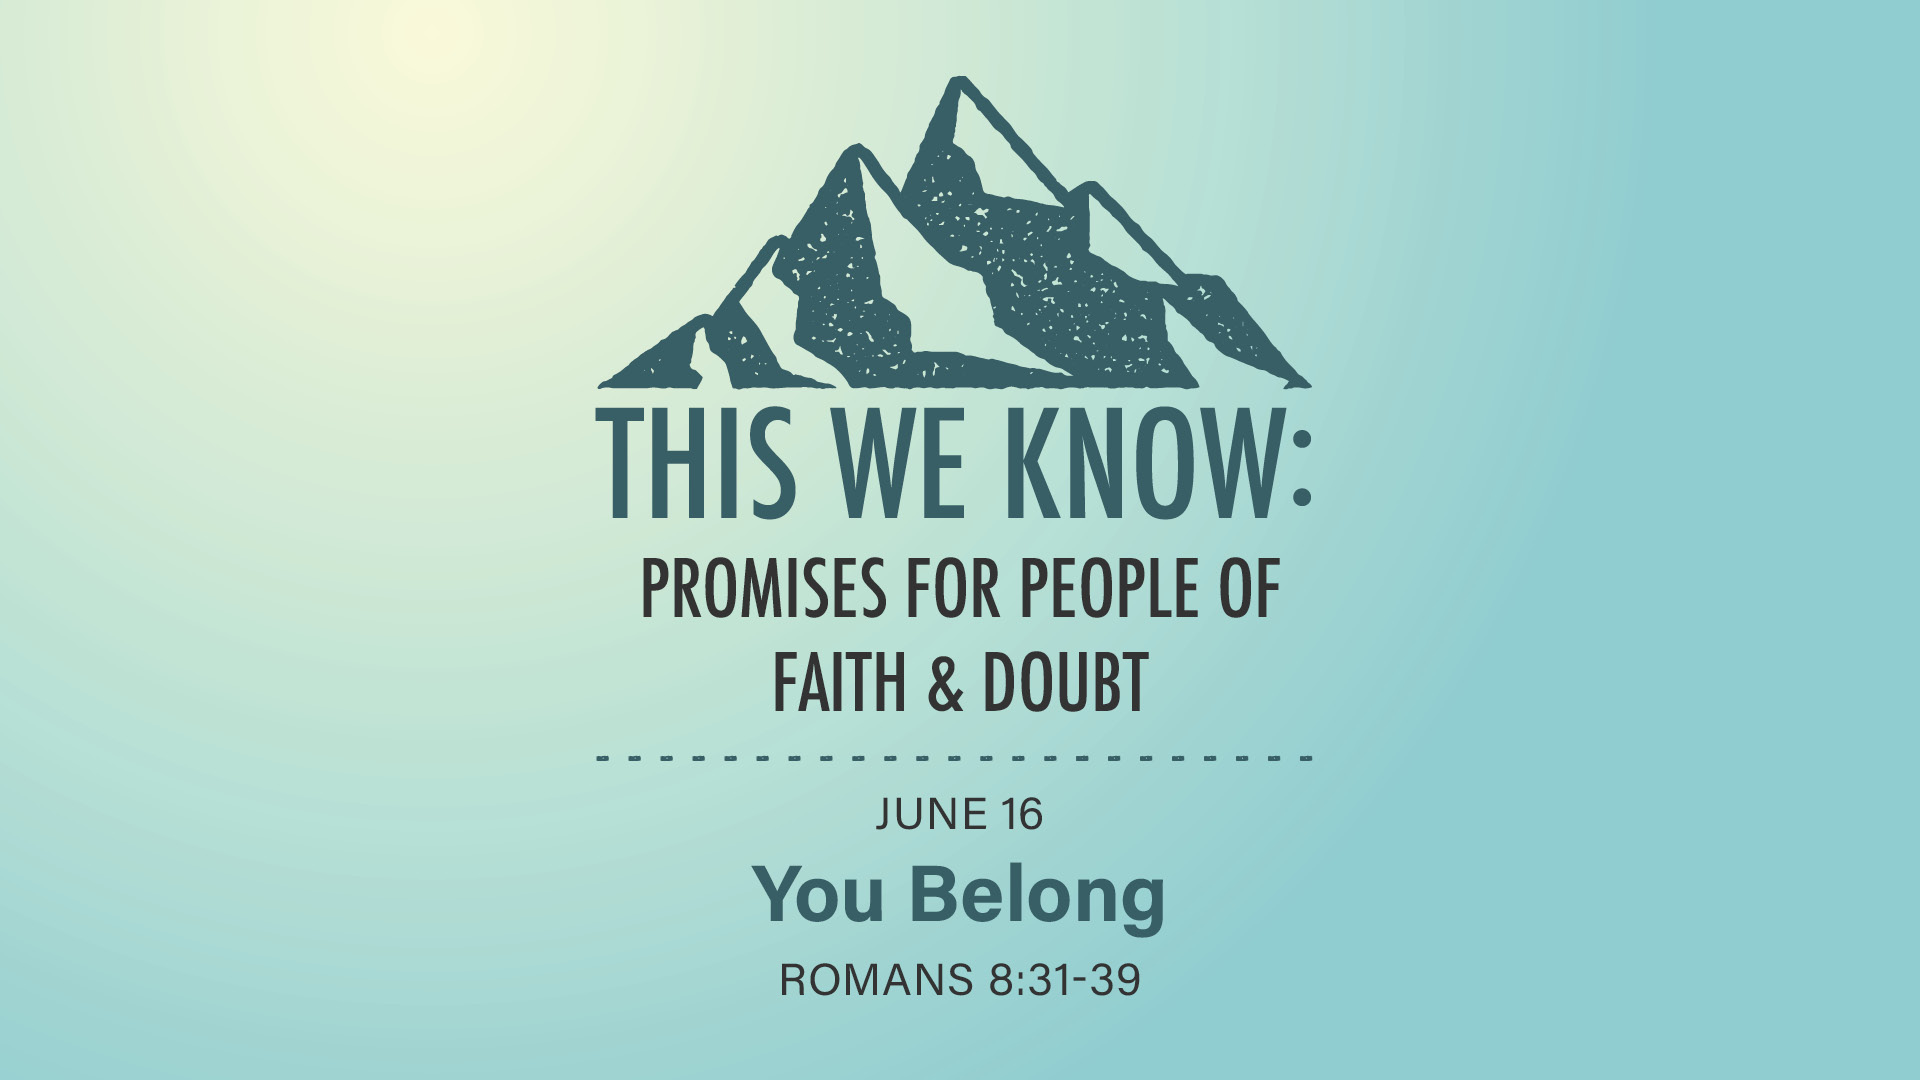 June 16 - This We Know: Promises for People of Faith & Doubt: You Belong